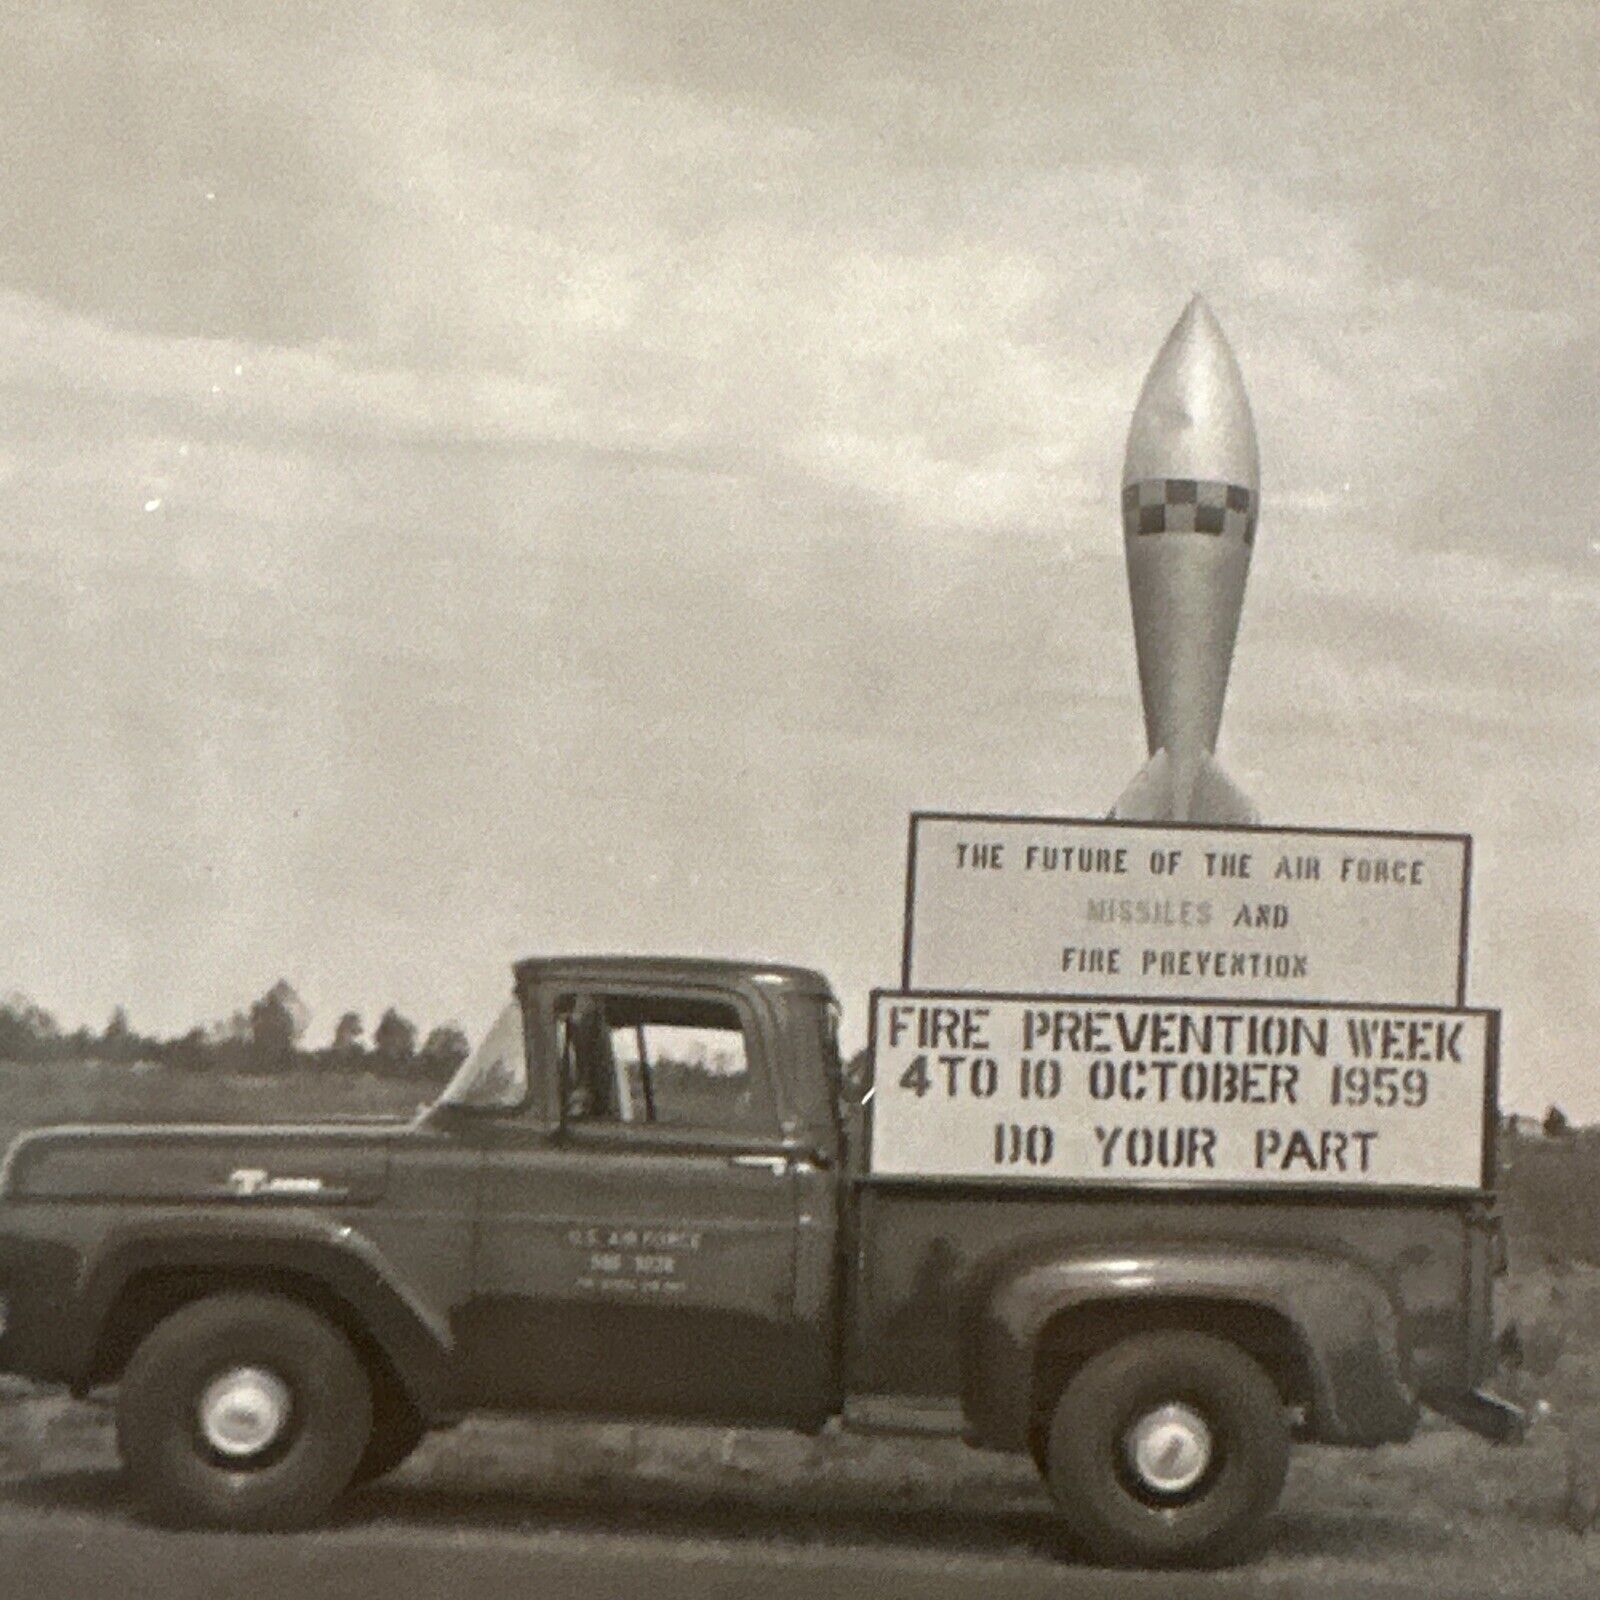 VINTAGE PHOTO 1959 Air Force Missiles Fire Prevention Sign On Truck Original WOW